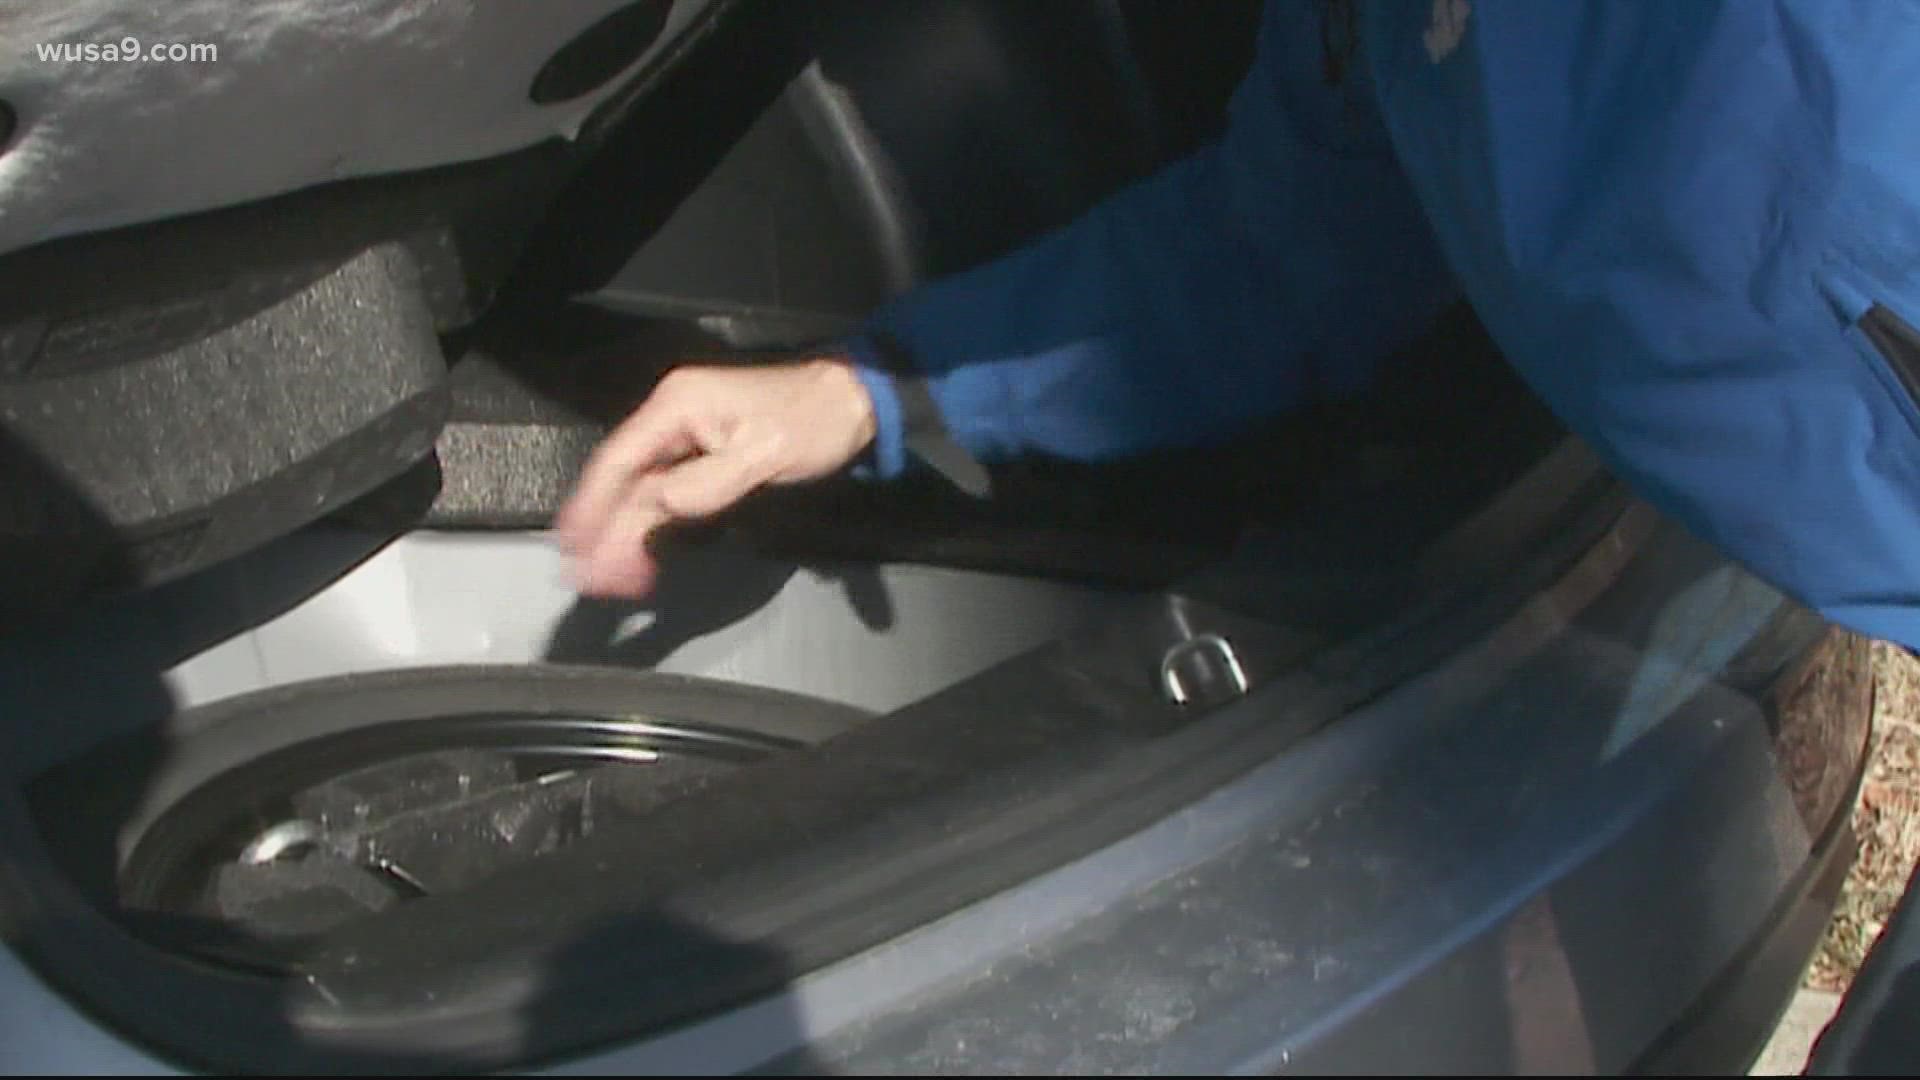 Many new cars have no spare tire, which has some tow truck crews "flat out" blasted with calls for repairs.